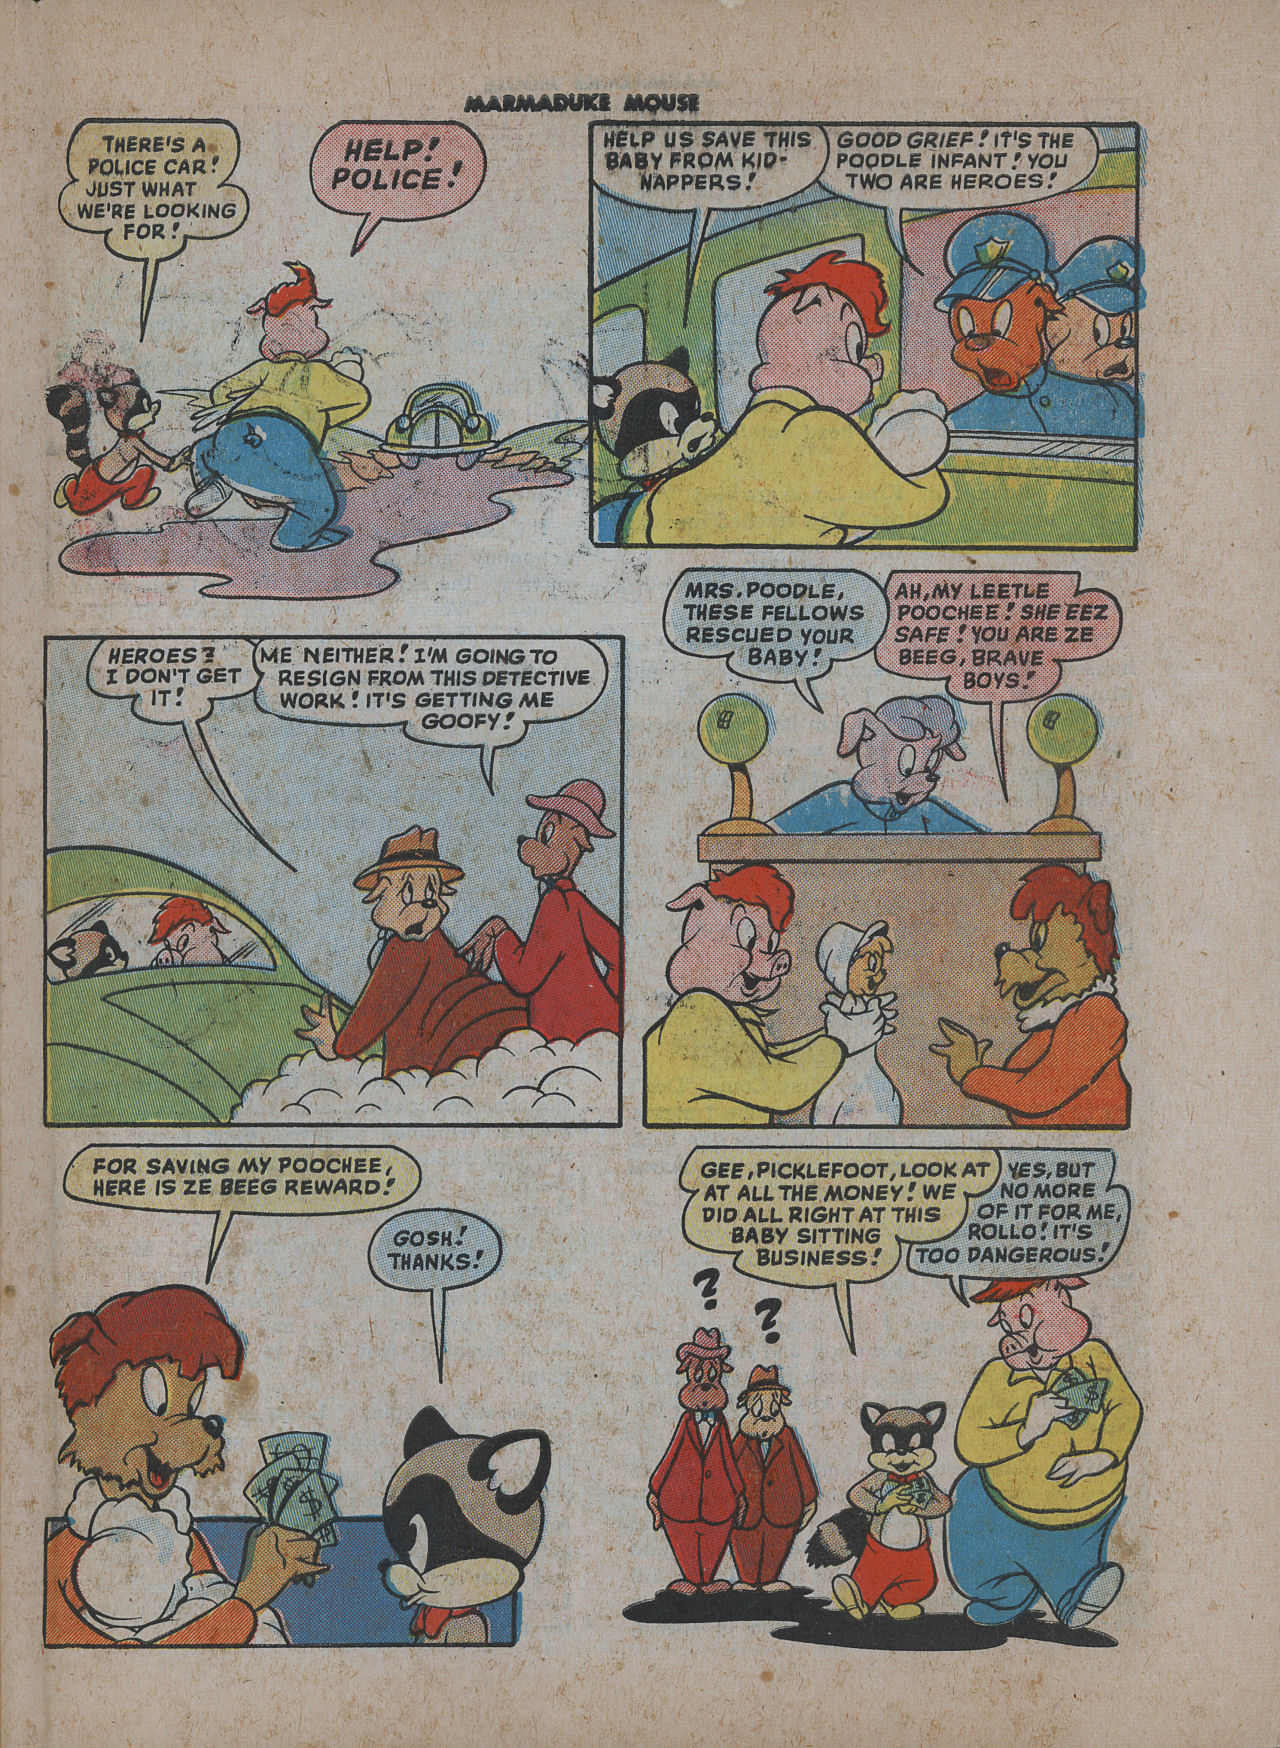 Read online Marmaduke Mouse comic -  Issue #15 - 27